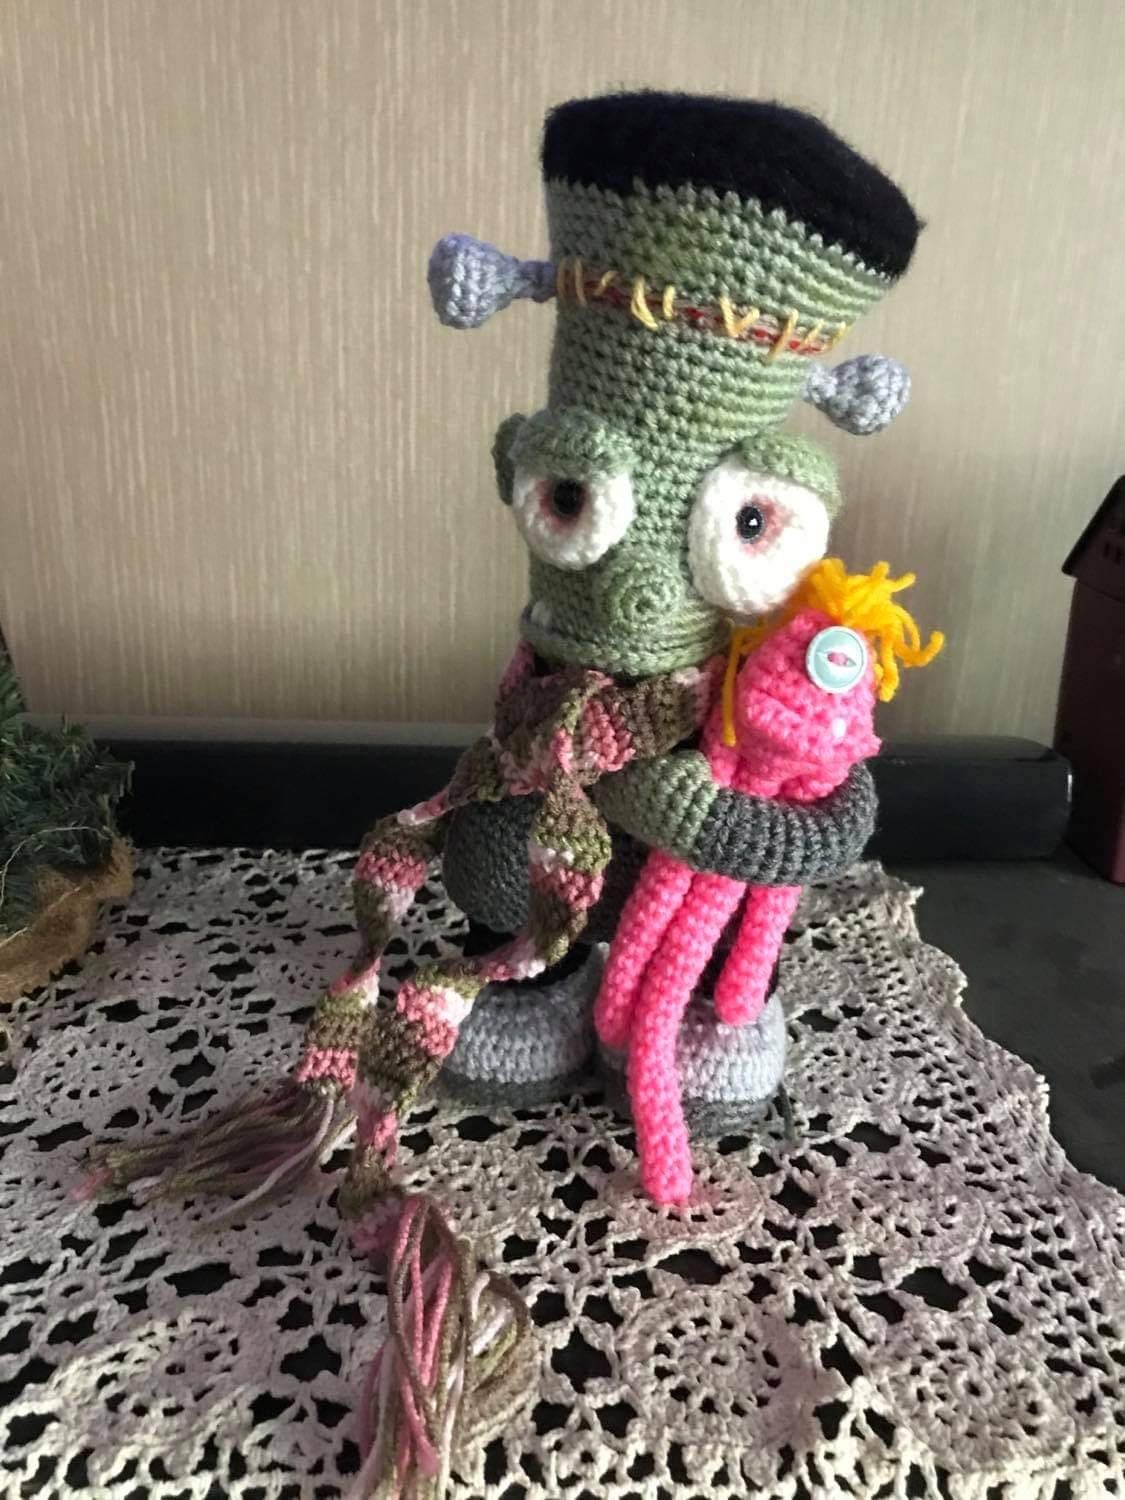 Amigurumi Crochet Frankenstein Pattern Review Free Monster for Cottontail and Whiskers by Rhea Estep